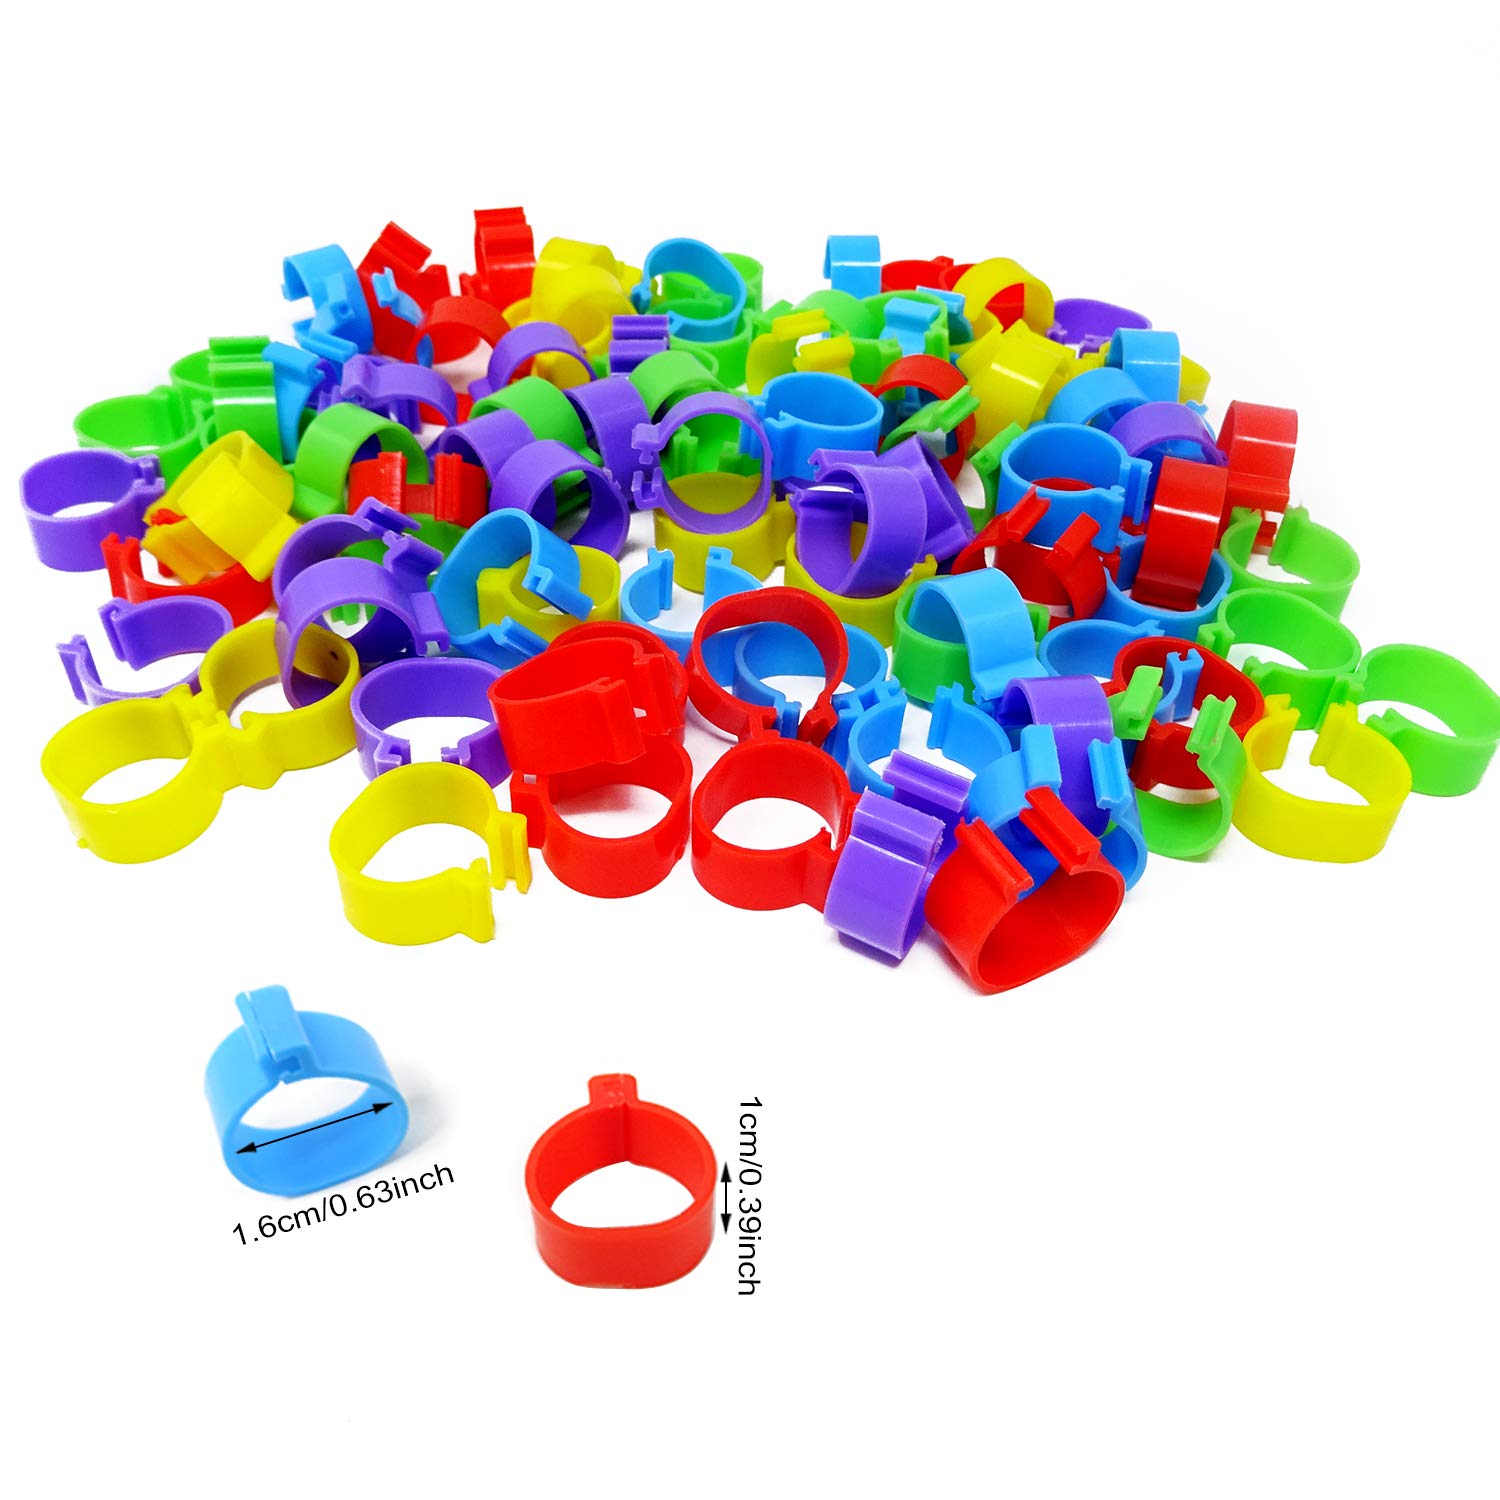 HONBAY 100PCS 5 Colors Poultry Foot Rings Leg Bands Clip-on Rings for Birds, Ducks and Chickens (16mm(1.1-5.5lbs))